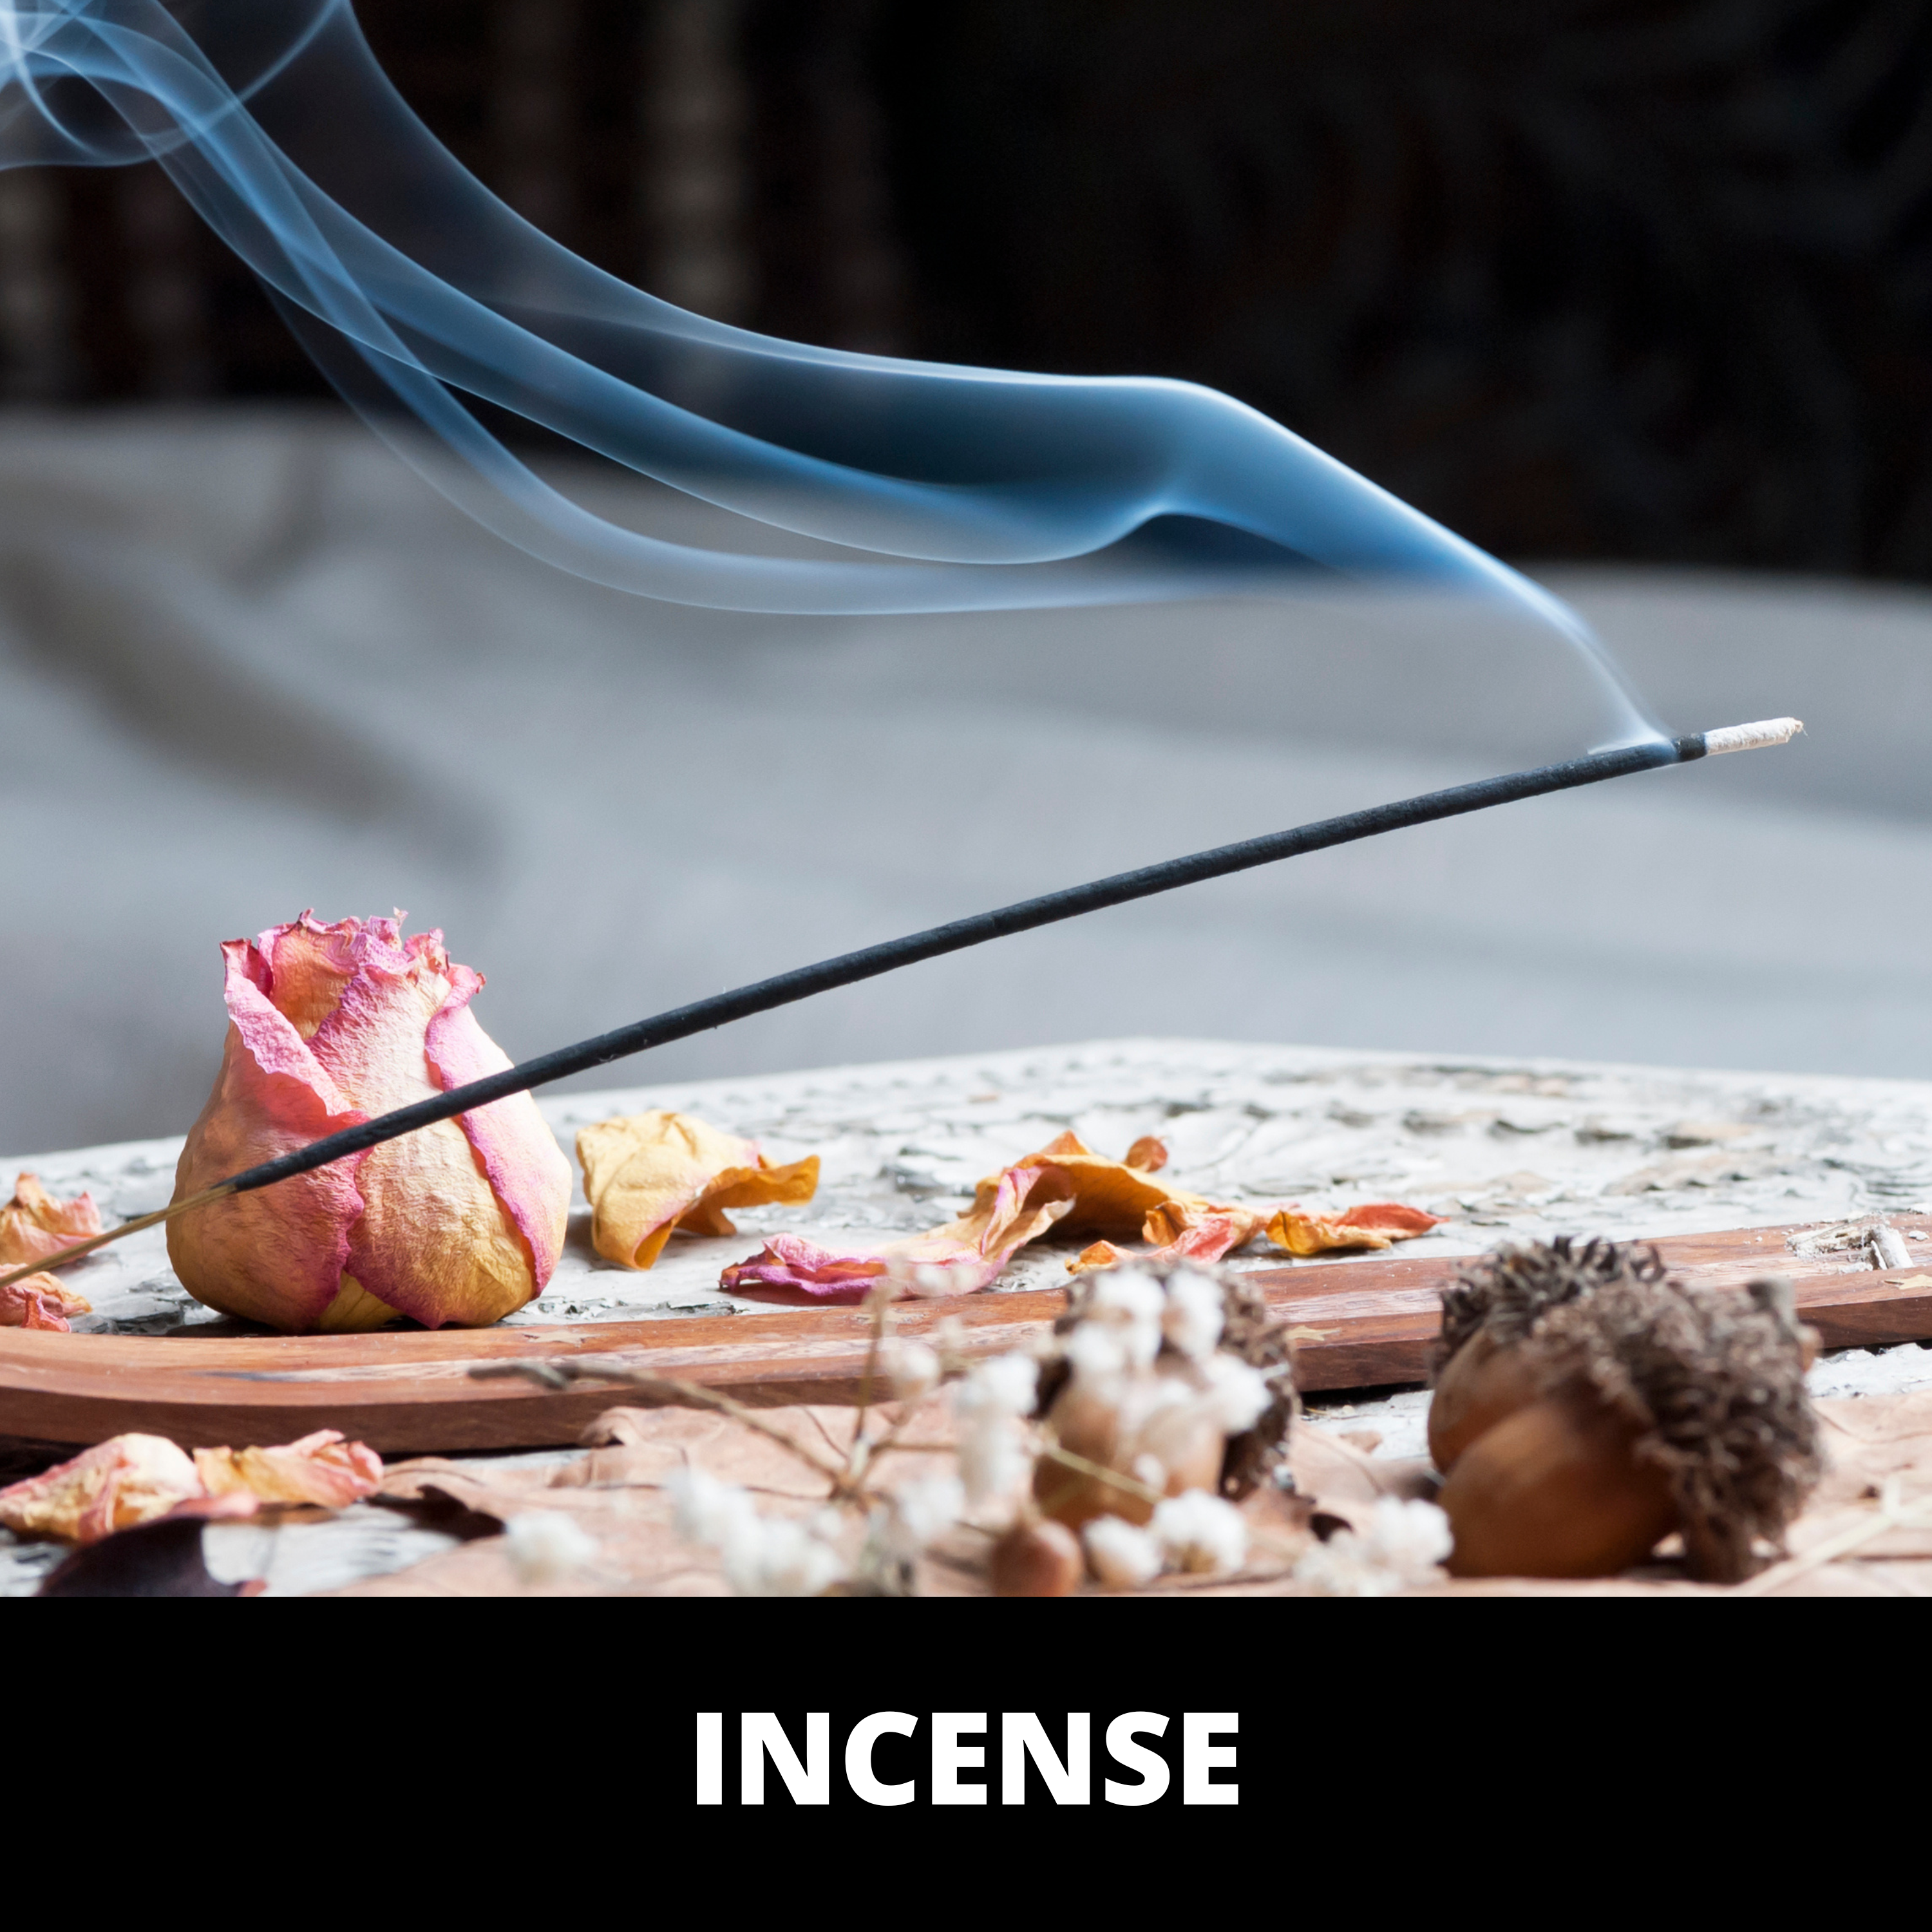 PRODUCT TYPE: Incense